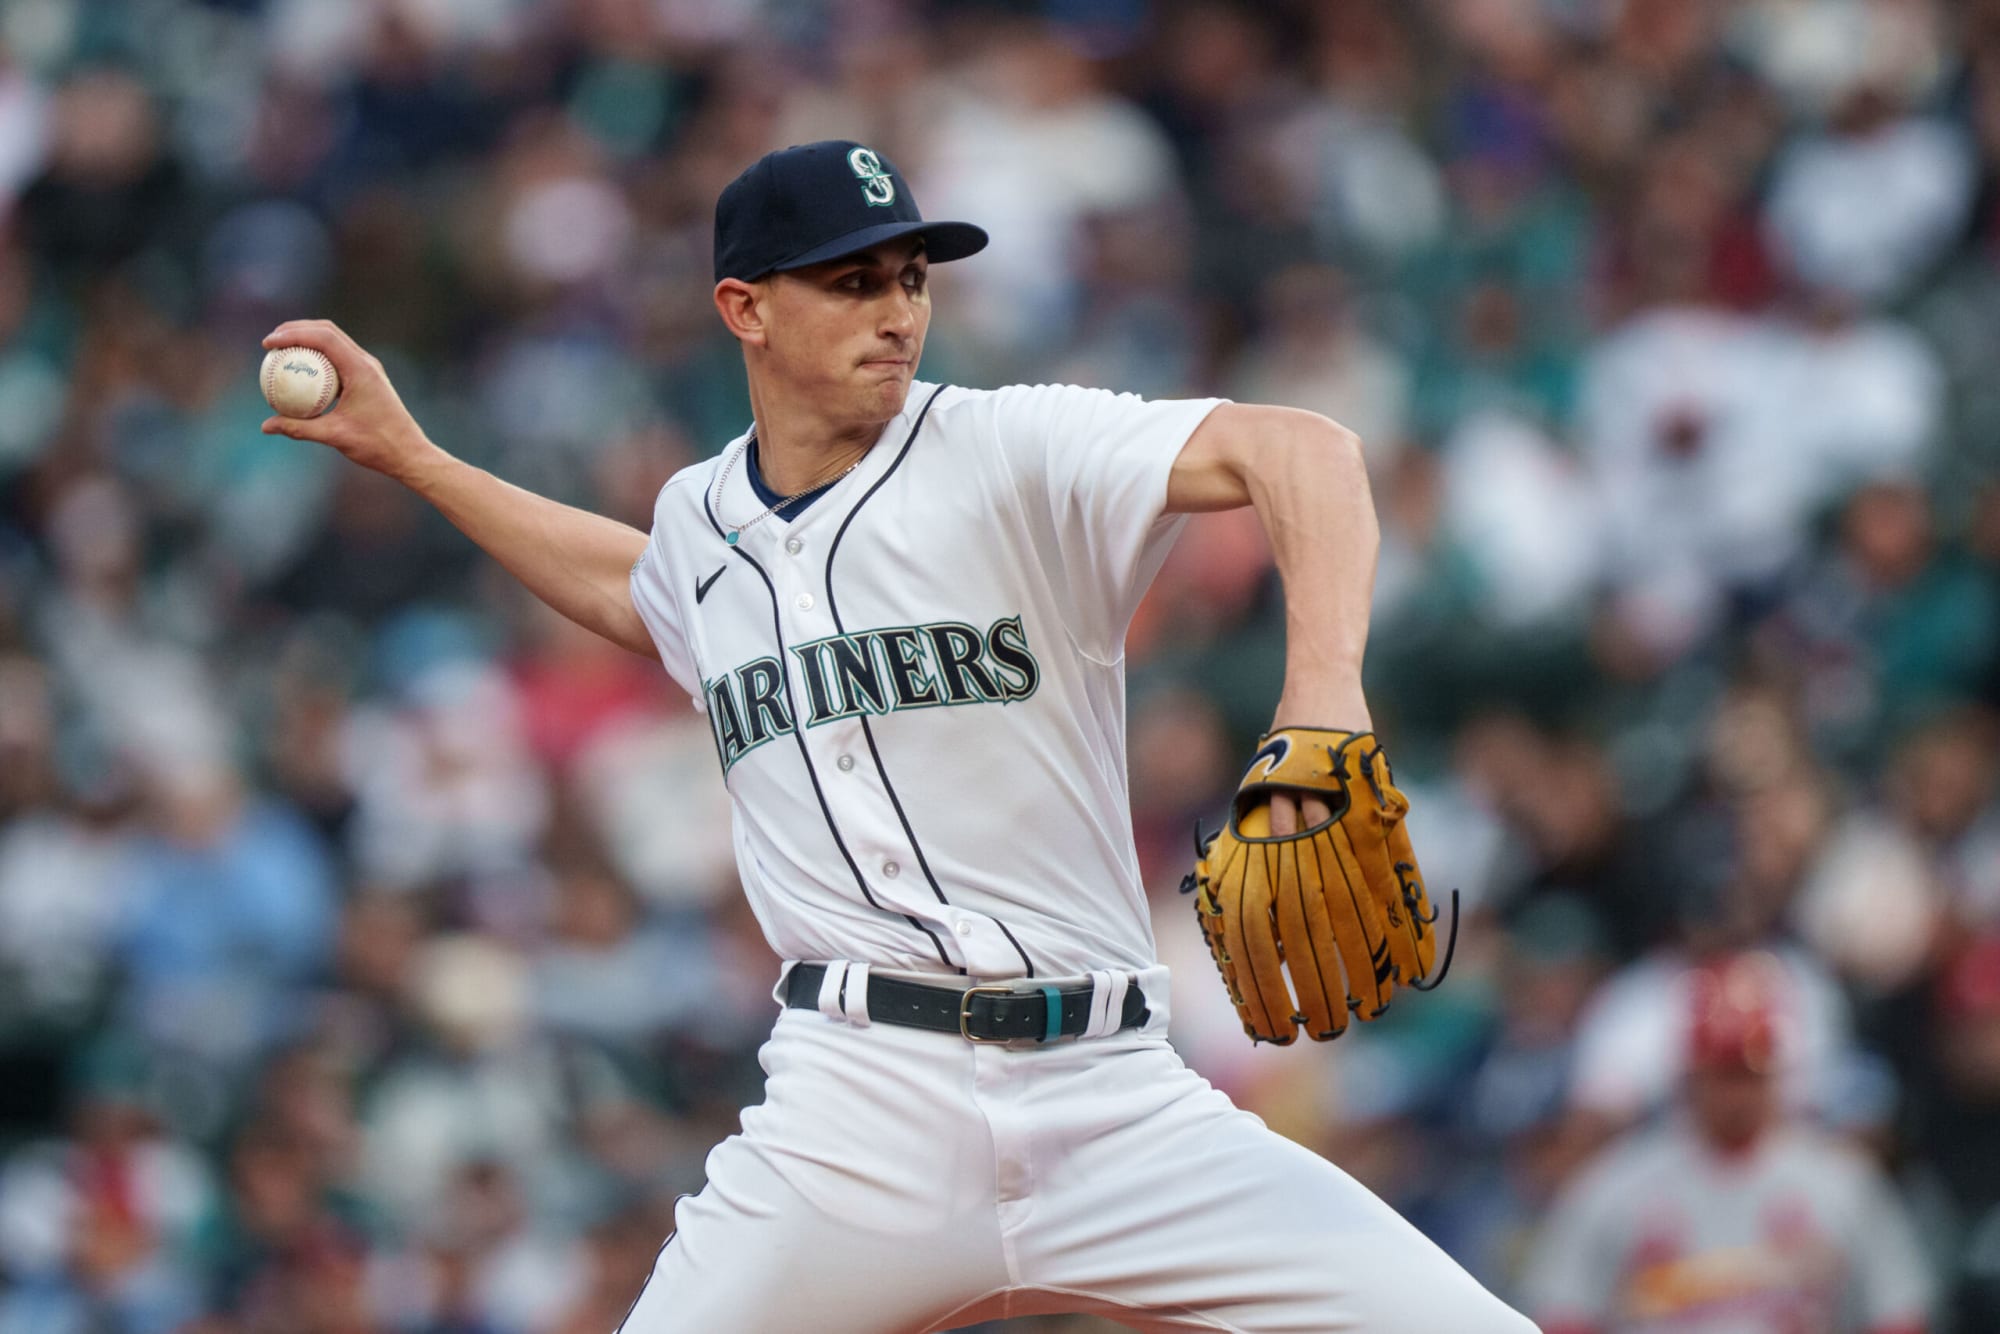 Rangers vs. Mariners prediction and odds for Tuesday, May 9 (Bank on a